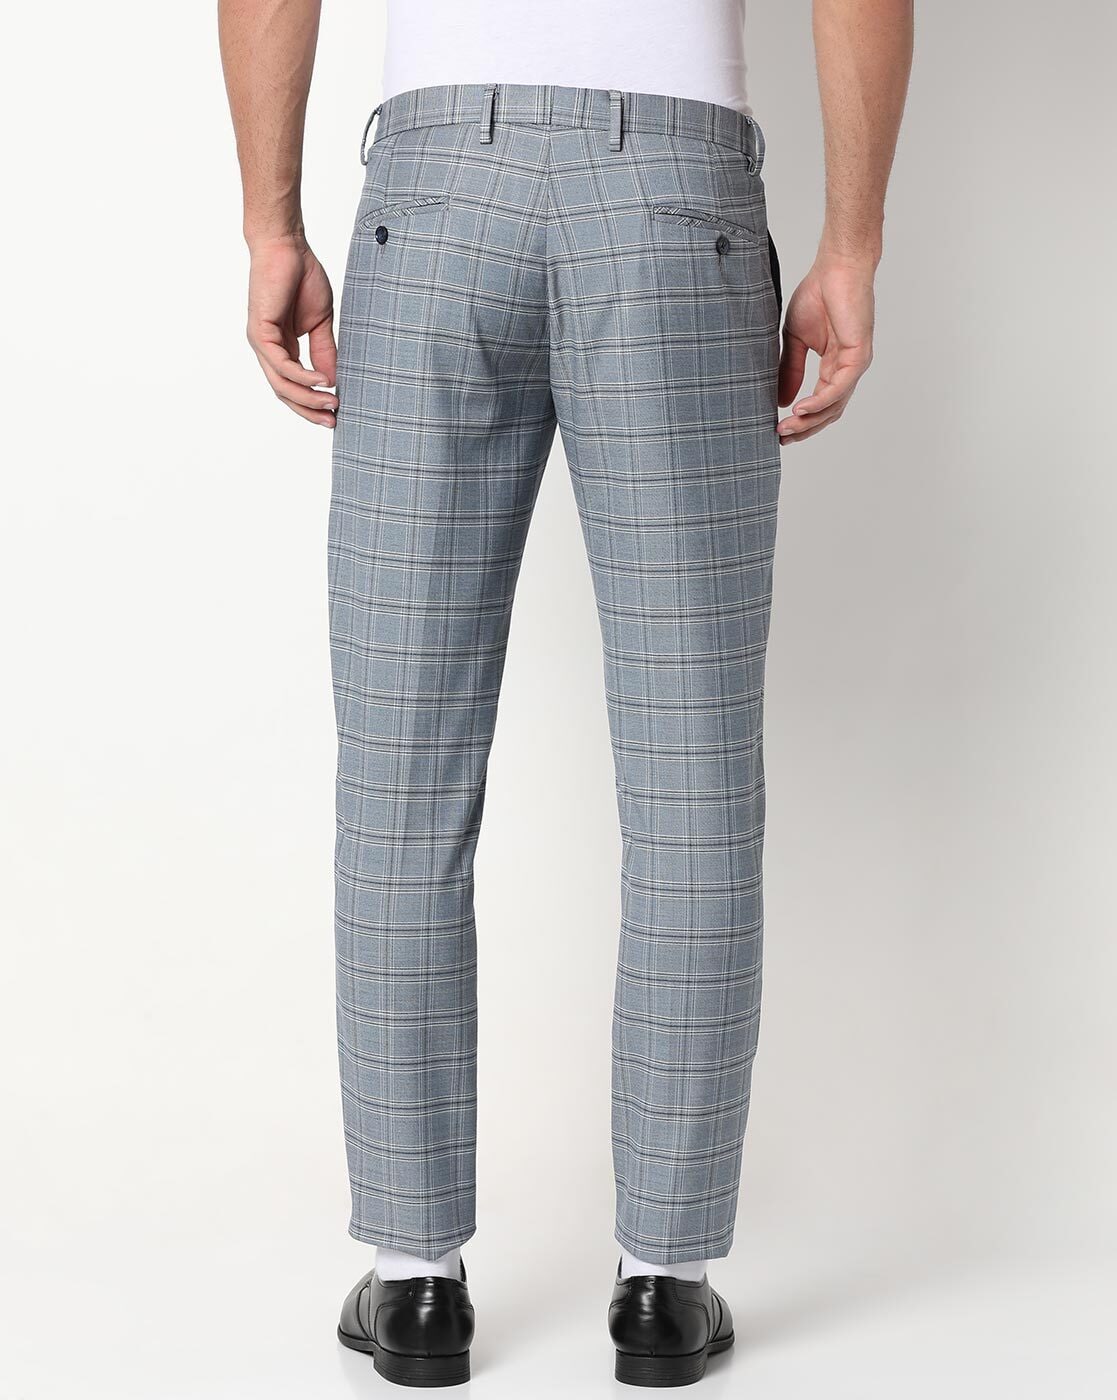 River Island skinny smart check trousers in grey  ASOS